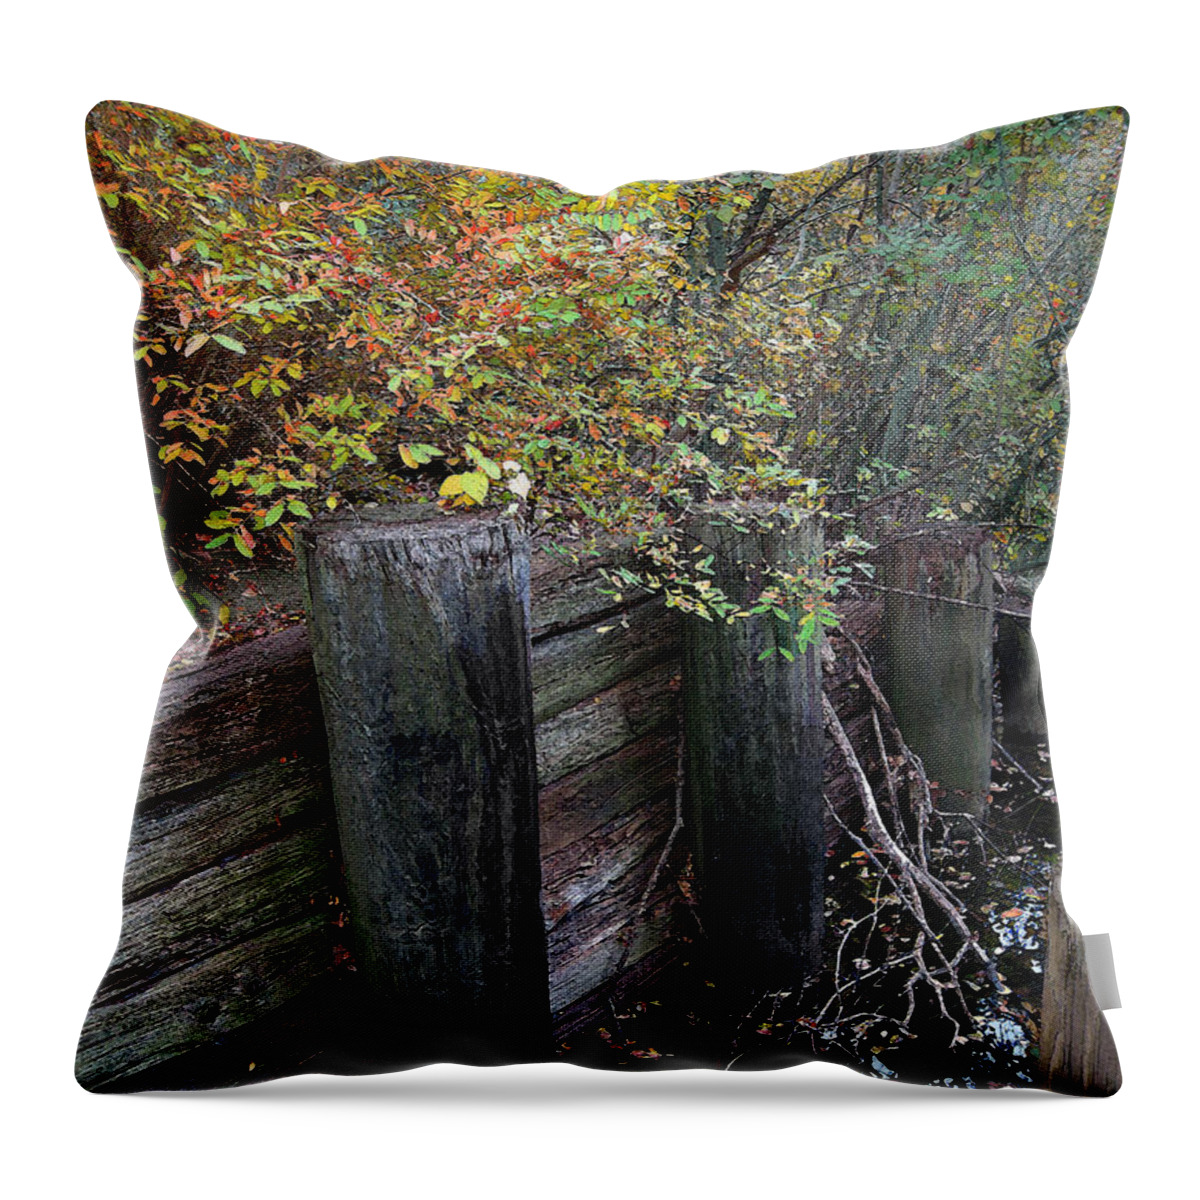 Cedric Hampton Throw Pillow featuring the photograph Weathered Wood In Autumn by Cedric Hampton